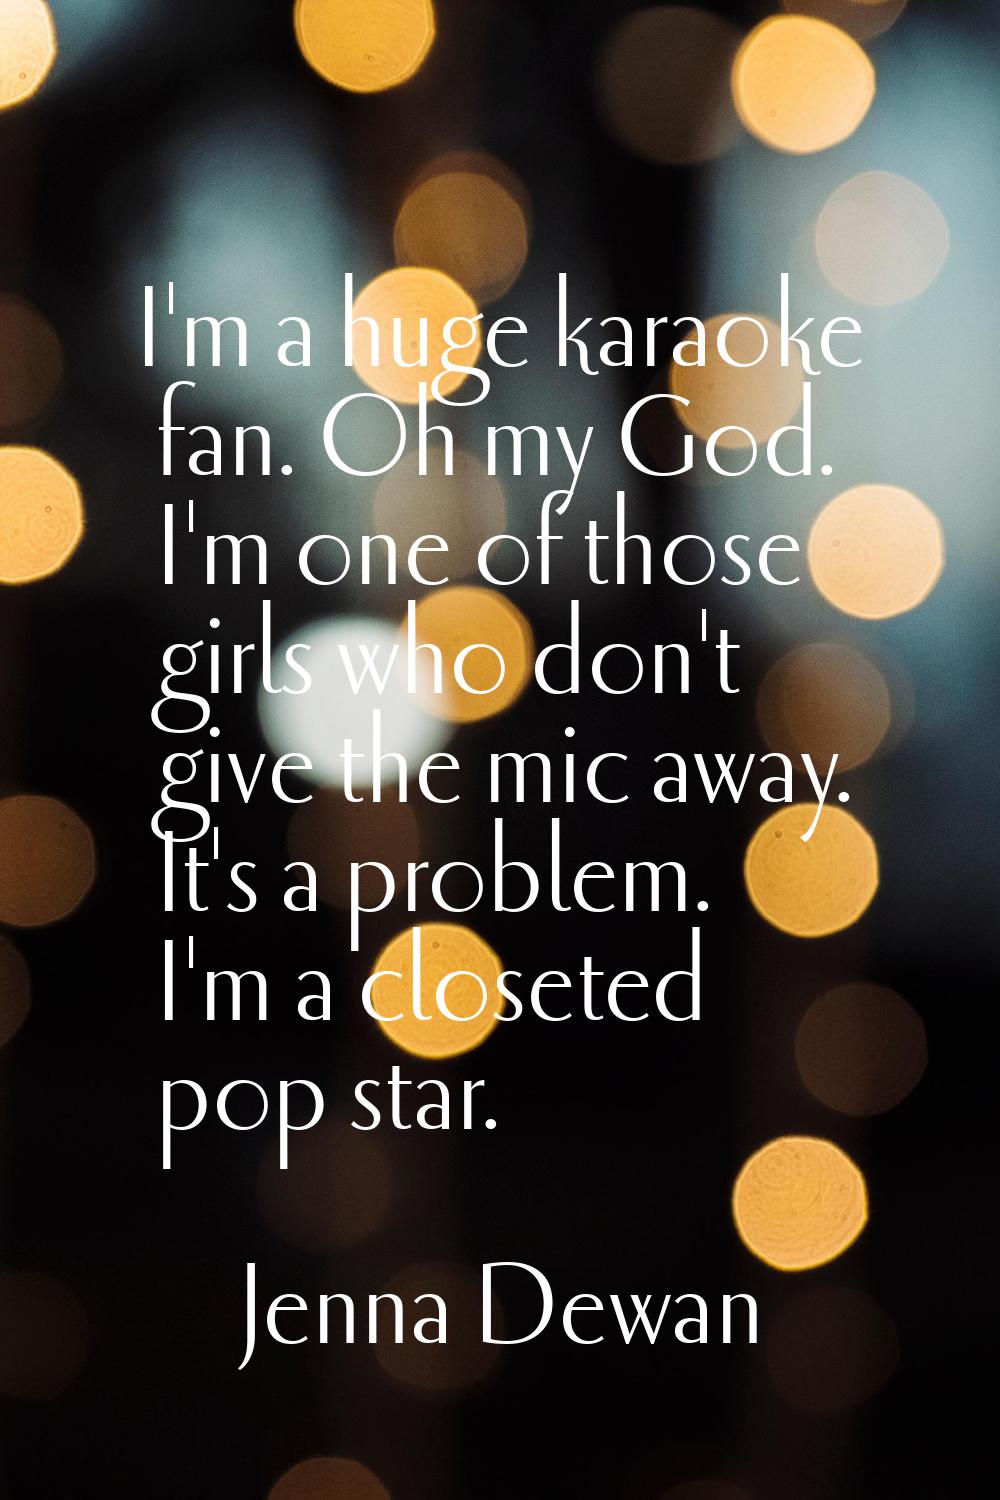 I'm a huge karaoke fan. Oh my God. I'm one of those girls who don't give the mic away. It's a probl